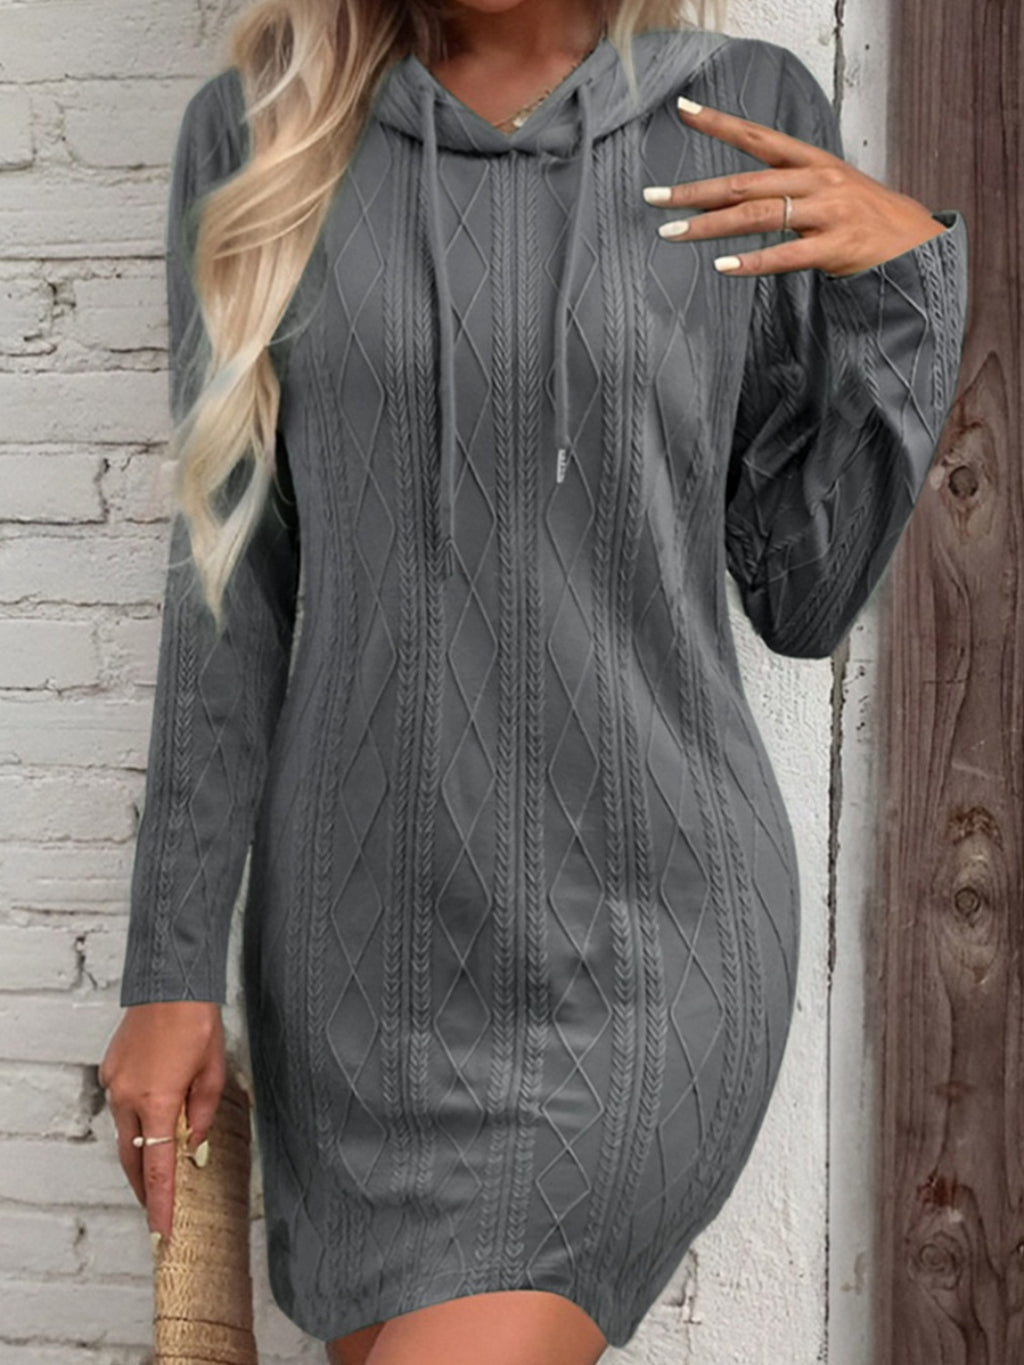 Drawstring Hooded Sweater Dress (5 Colors)  Krazy Heart Designs Boutique Heather Gray S 